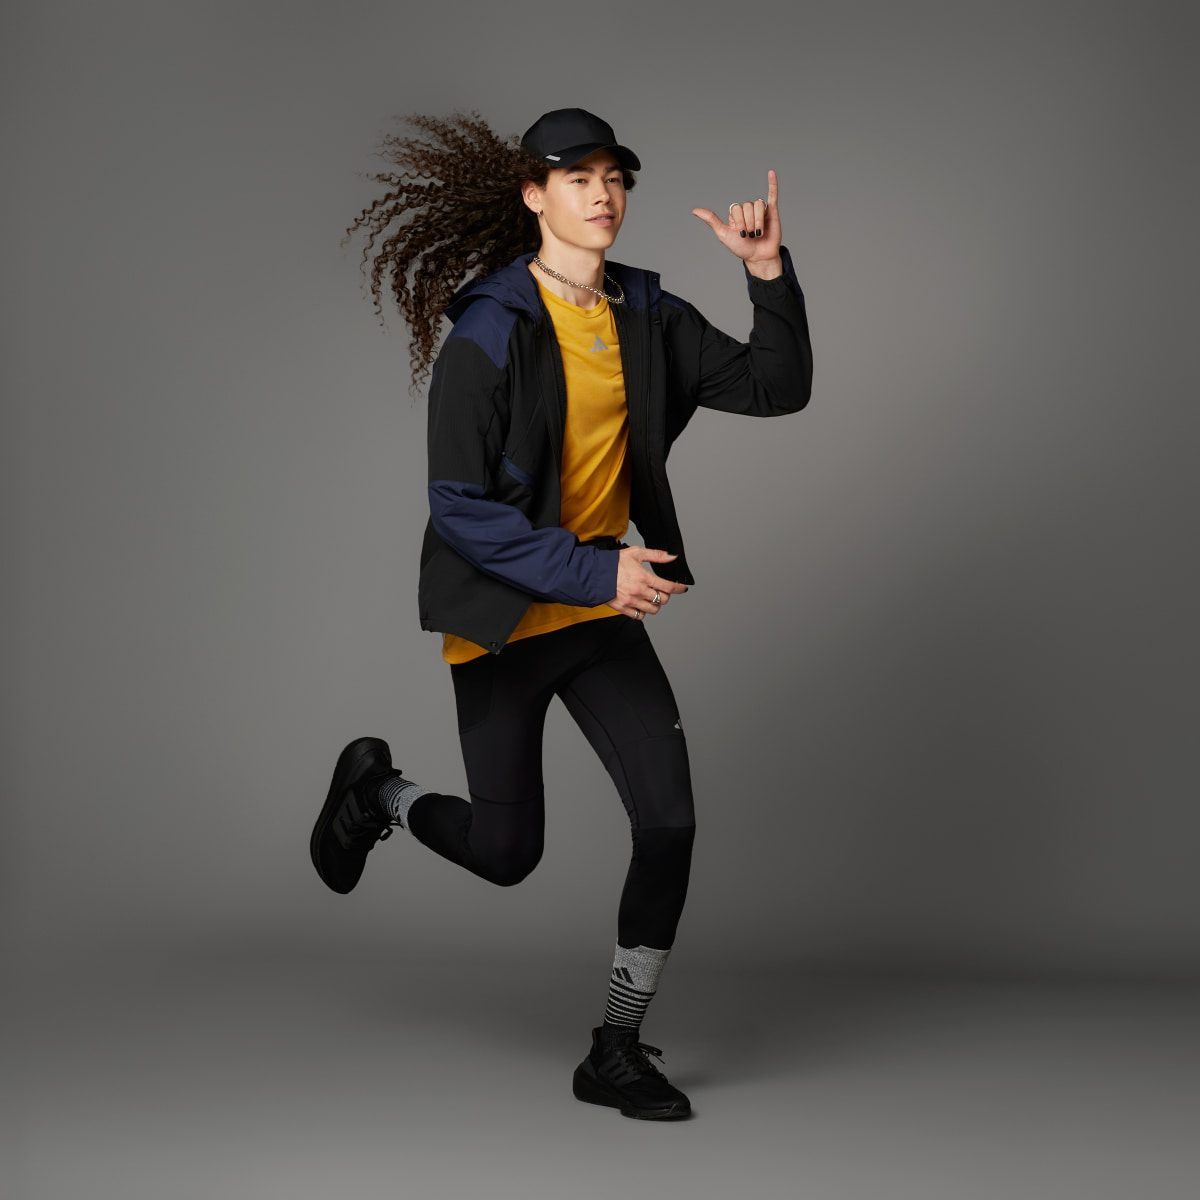 Adidas Ultimate Running Conquer the Elements COLD.RDY Leggings. 7